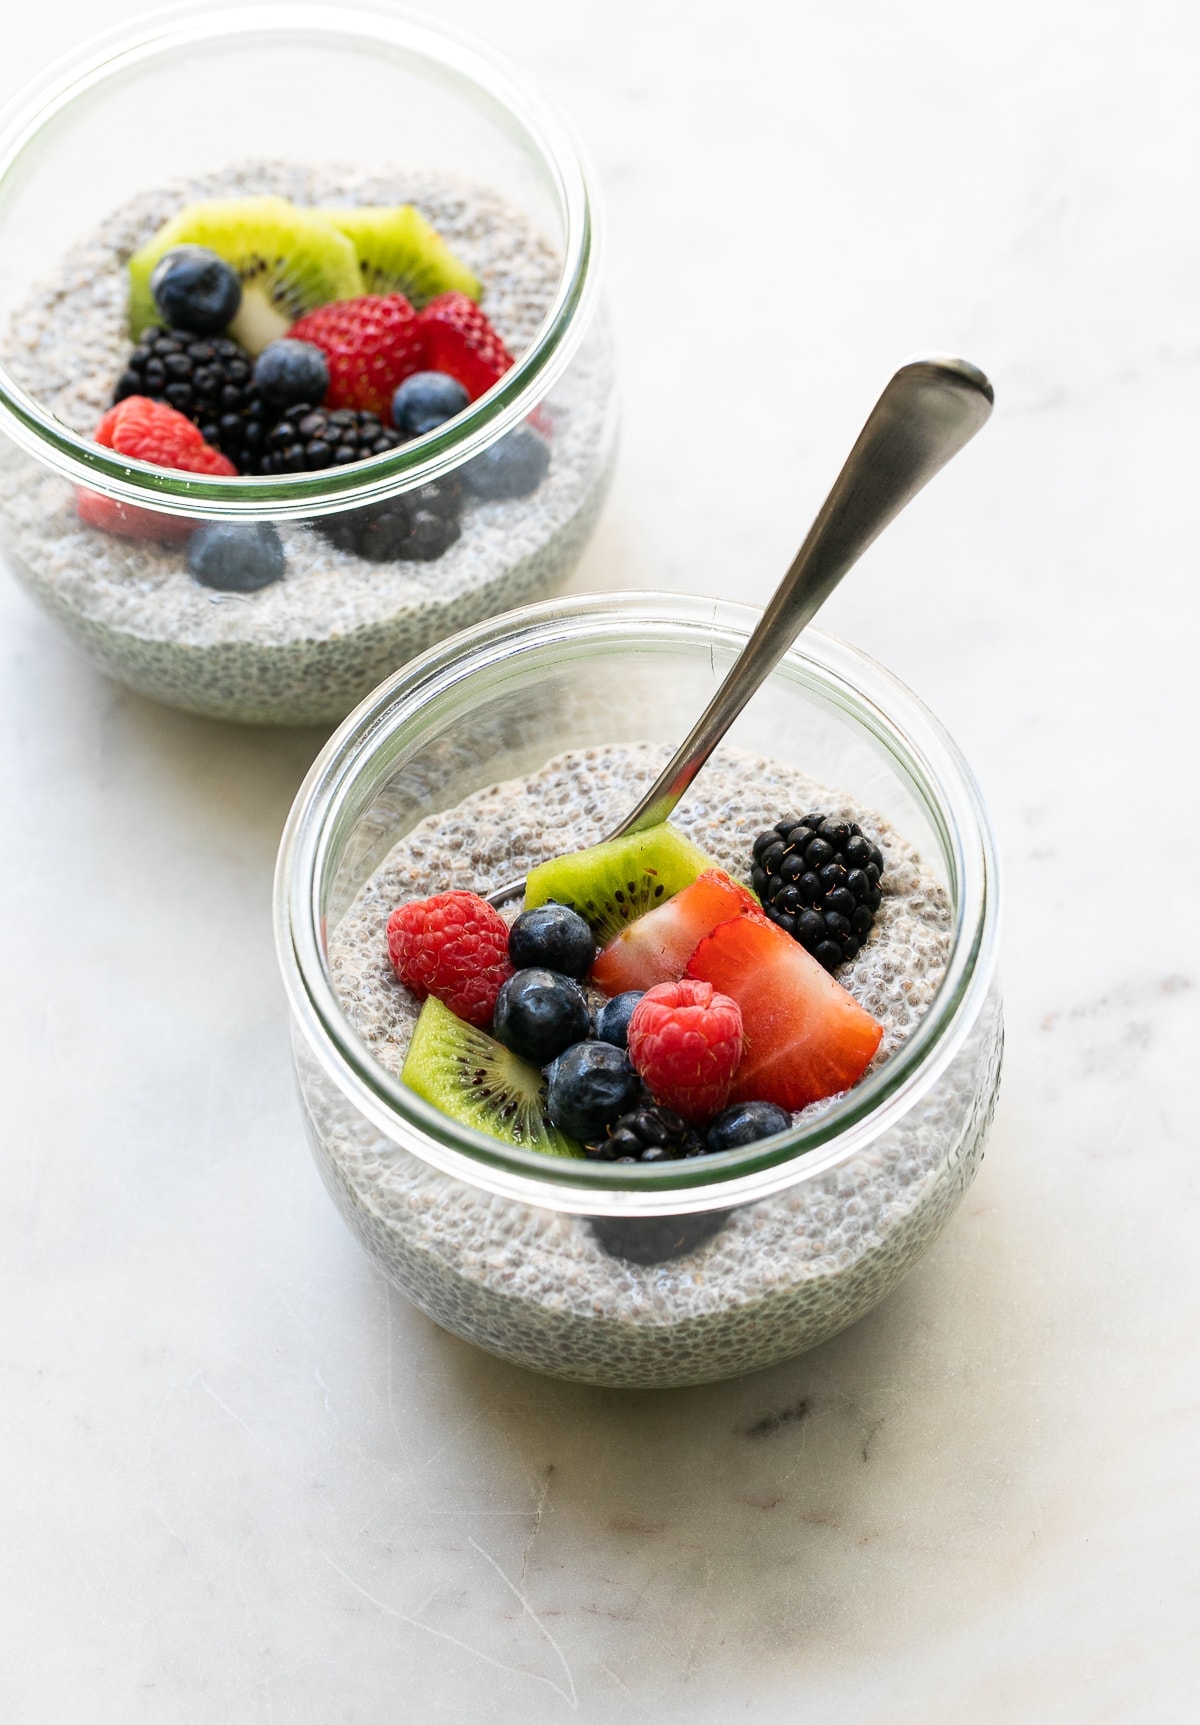 Best Chia Pudding (4 Ingredients + Easy Recipe ) - The Simple